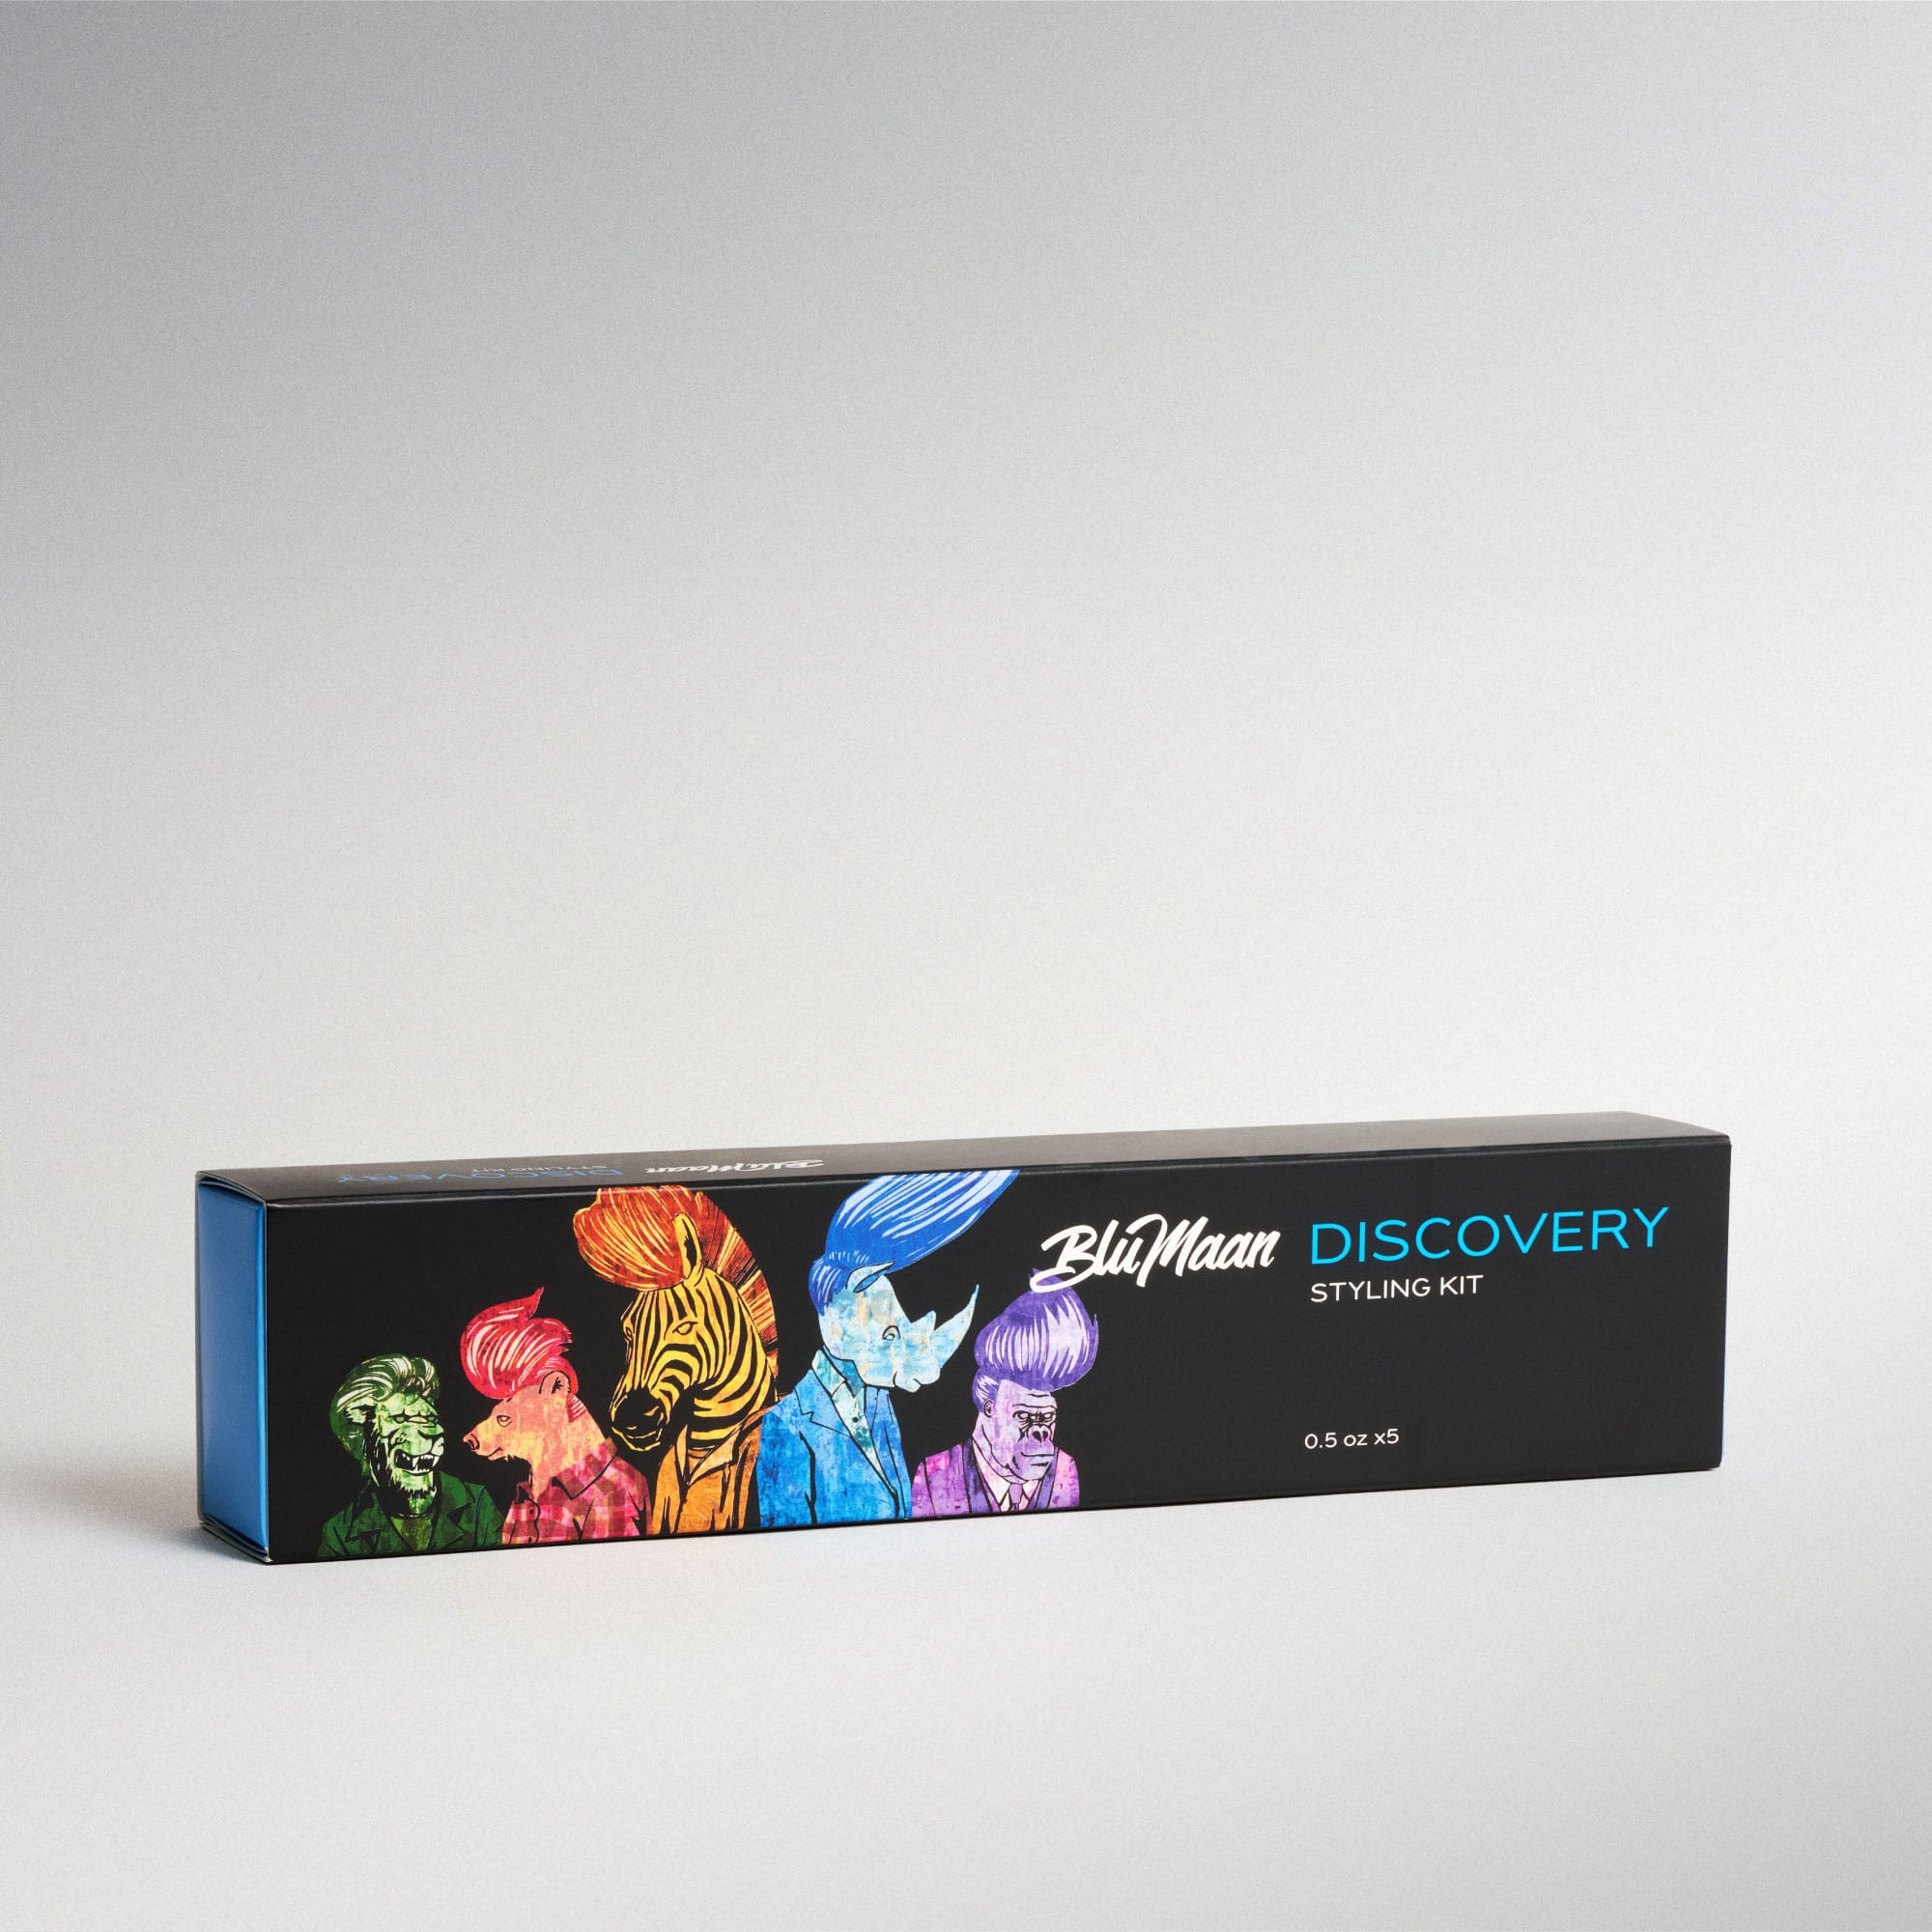 Discovery Styling Kit